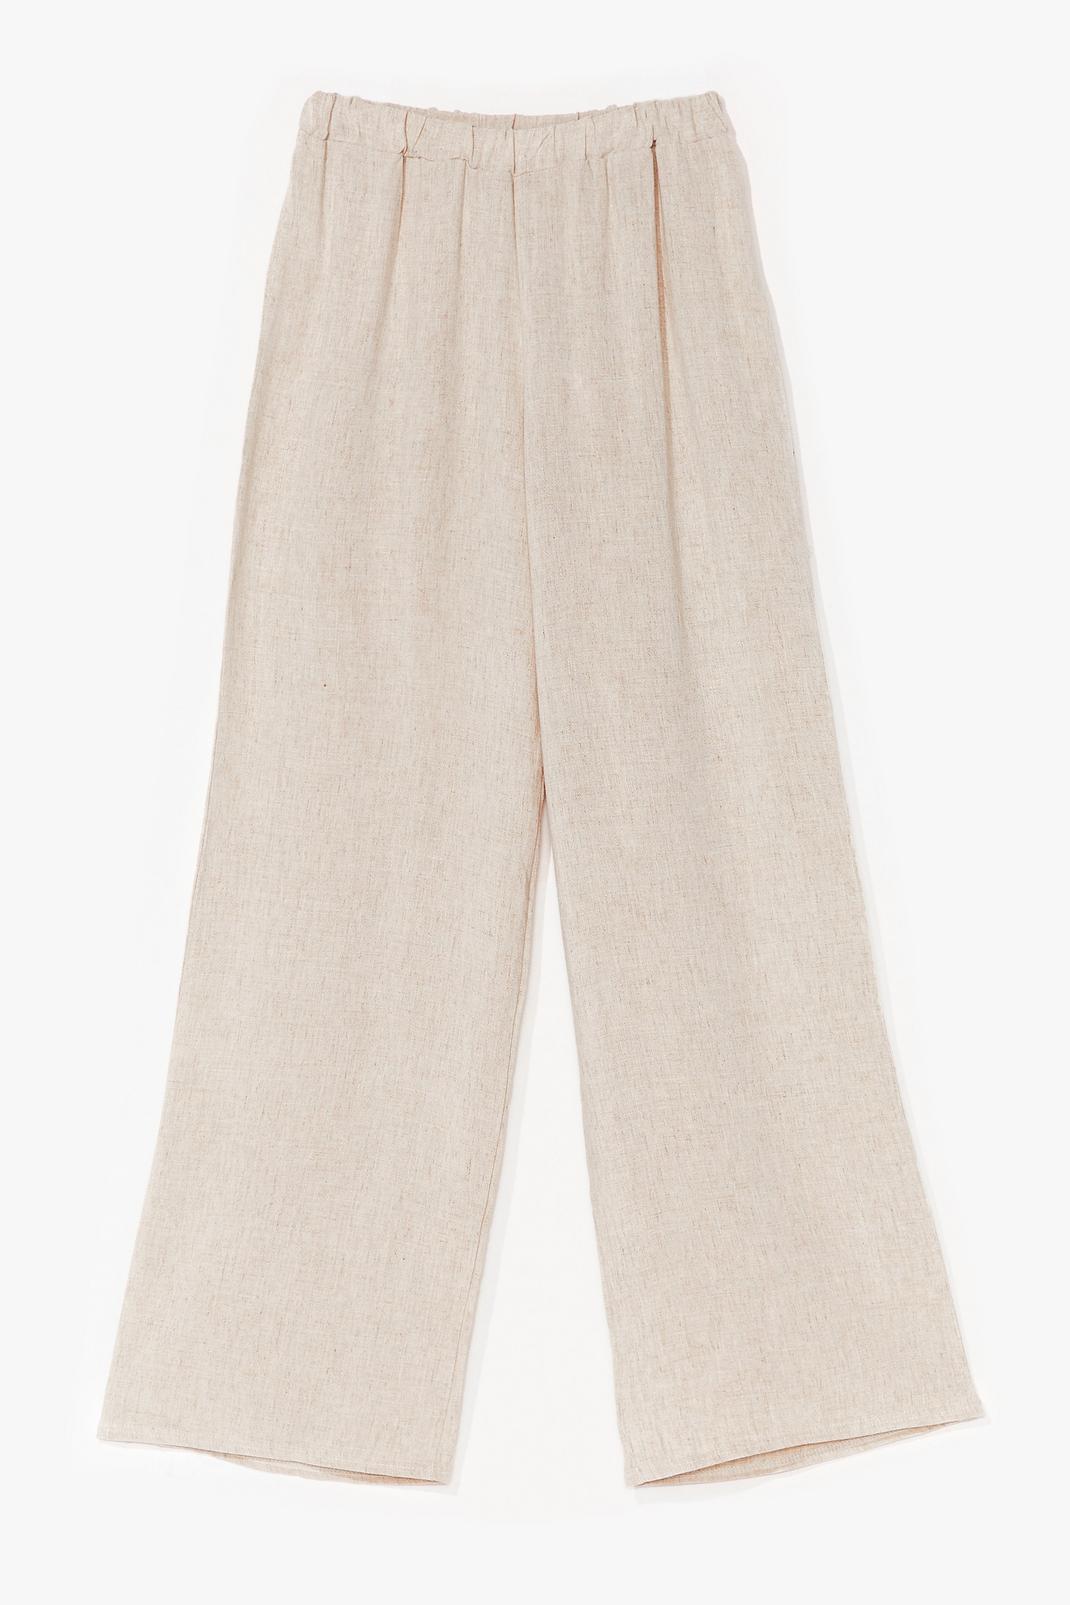 Stone Linen to the Rhythm High-Waisted Wide-Leg Pants image number 1